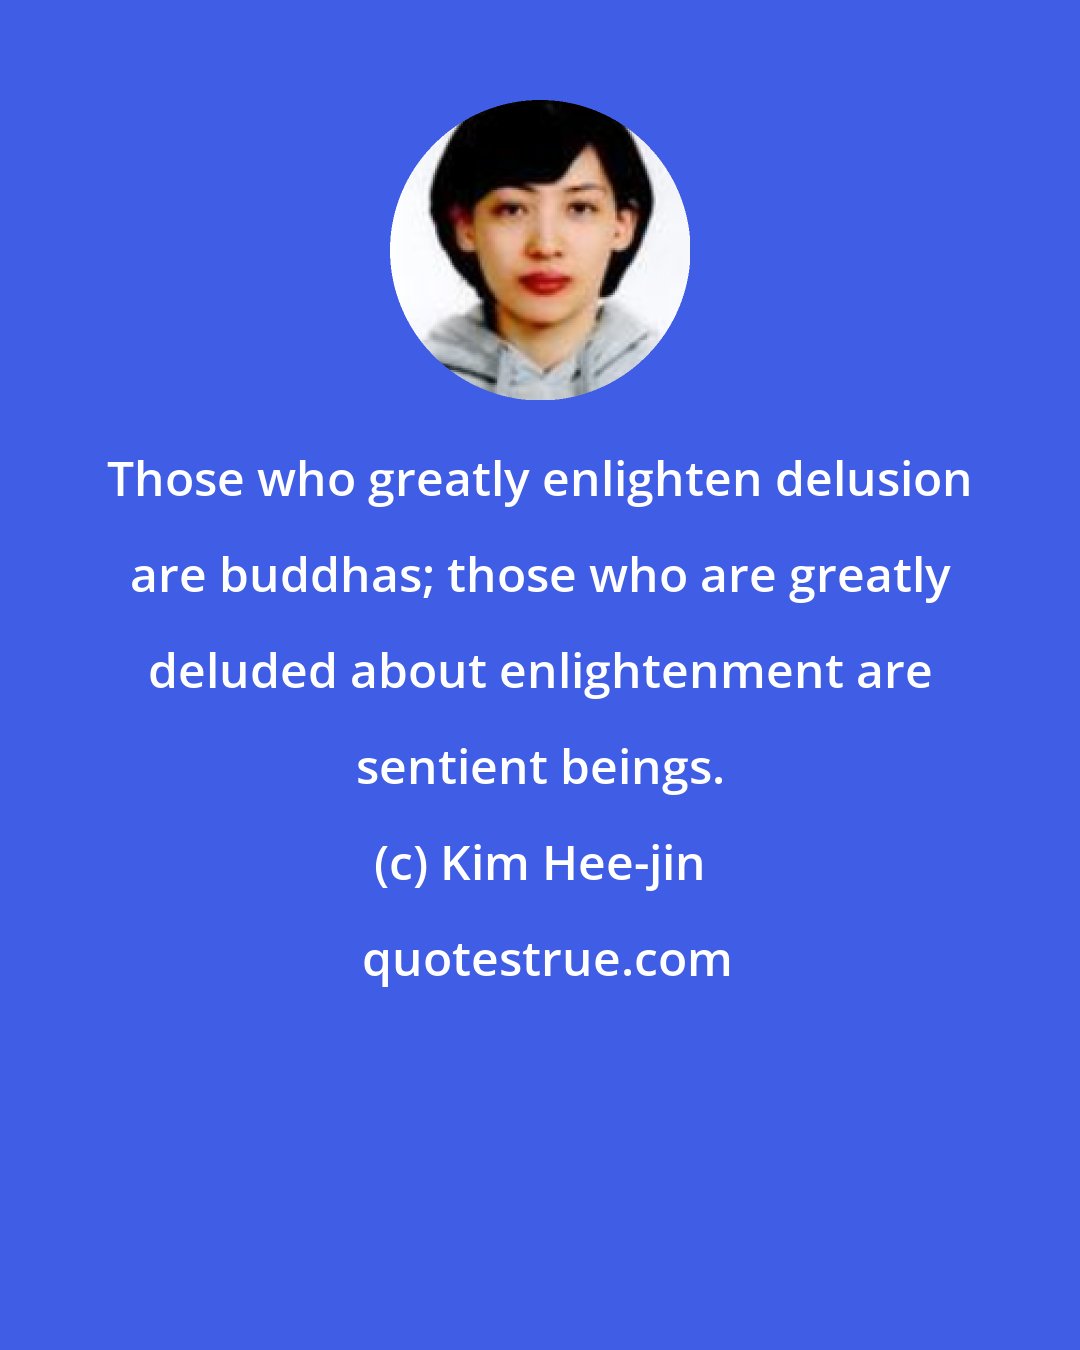 Kim Hee-jin: Those who greatly enlighten delusion are buddhas; those who are greatly deluded about enlightenment are sentient beings.